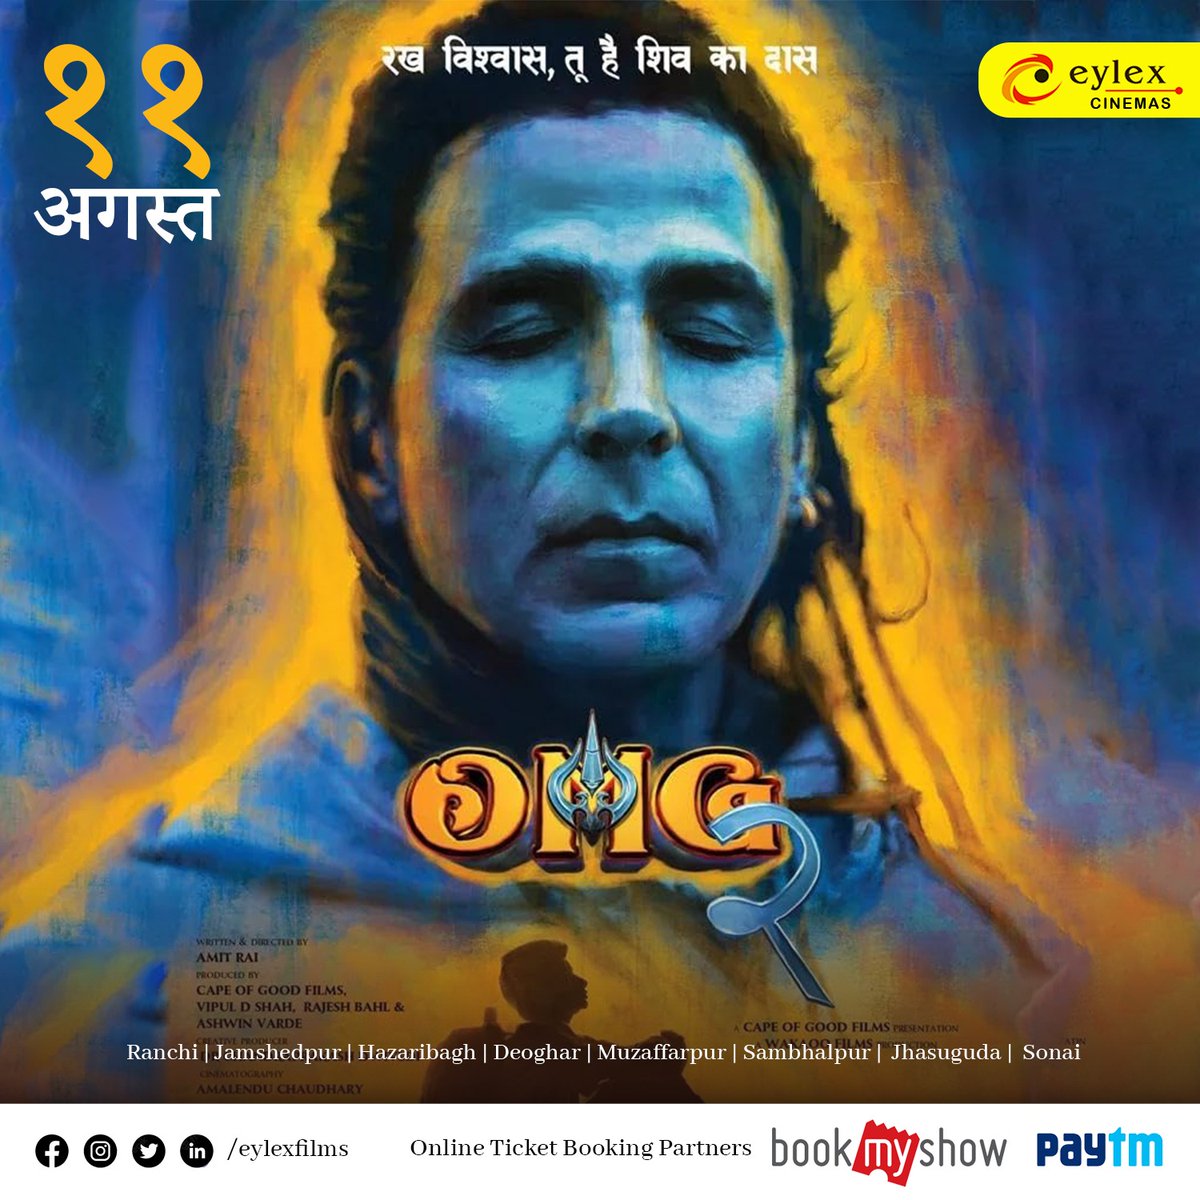 Get ready for a divine laughter riot! The poster for Akshay Kumar's much-awaited film 'OMG 2' is here. Get ready to be enlightened and entertained like never before. #OMG2 #DivineComedy #AkshayKumar